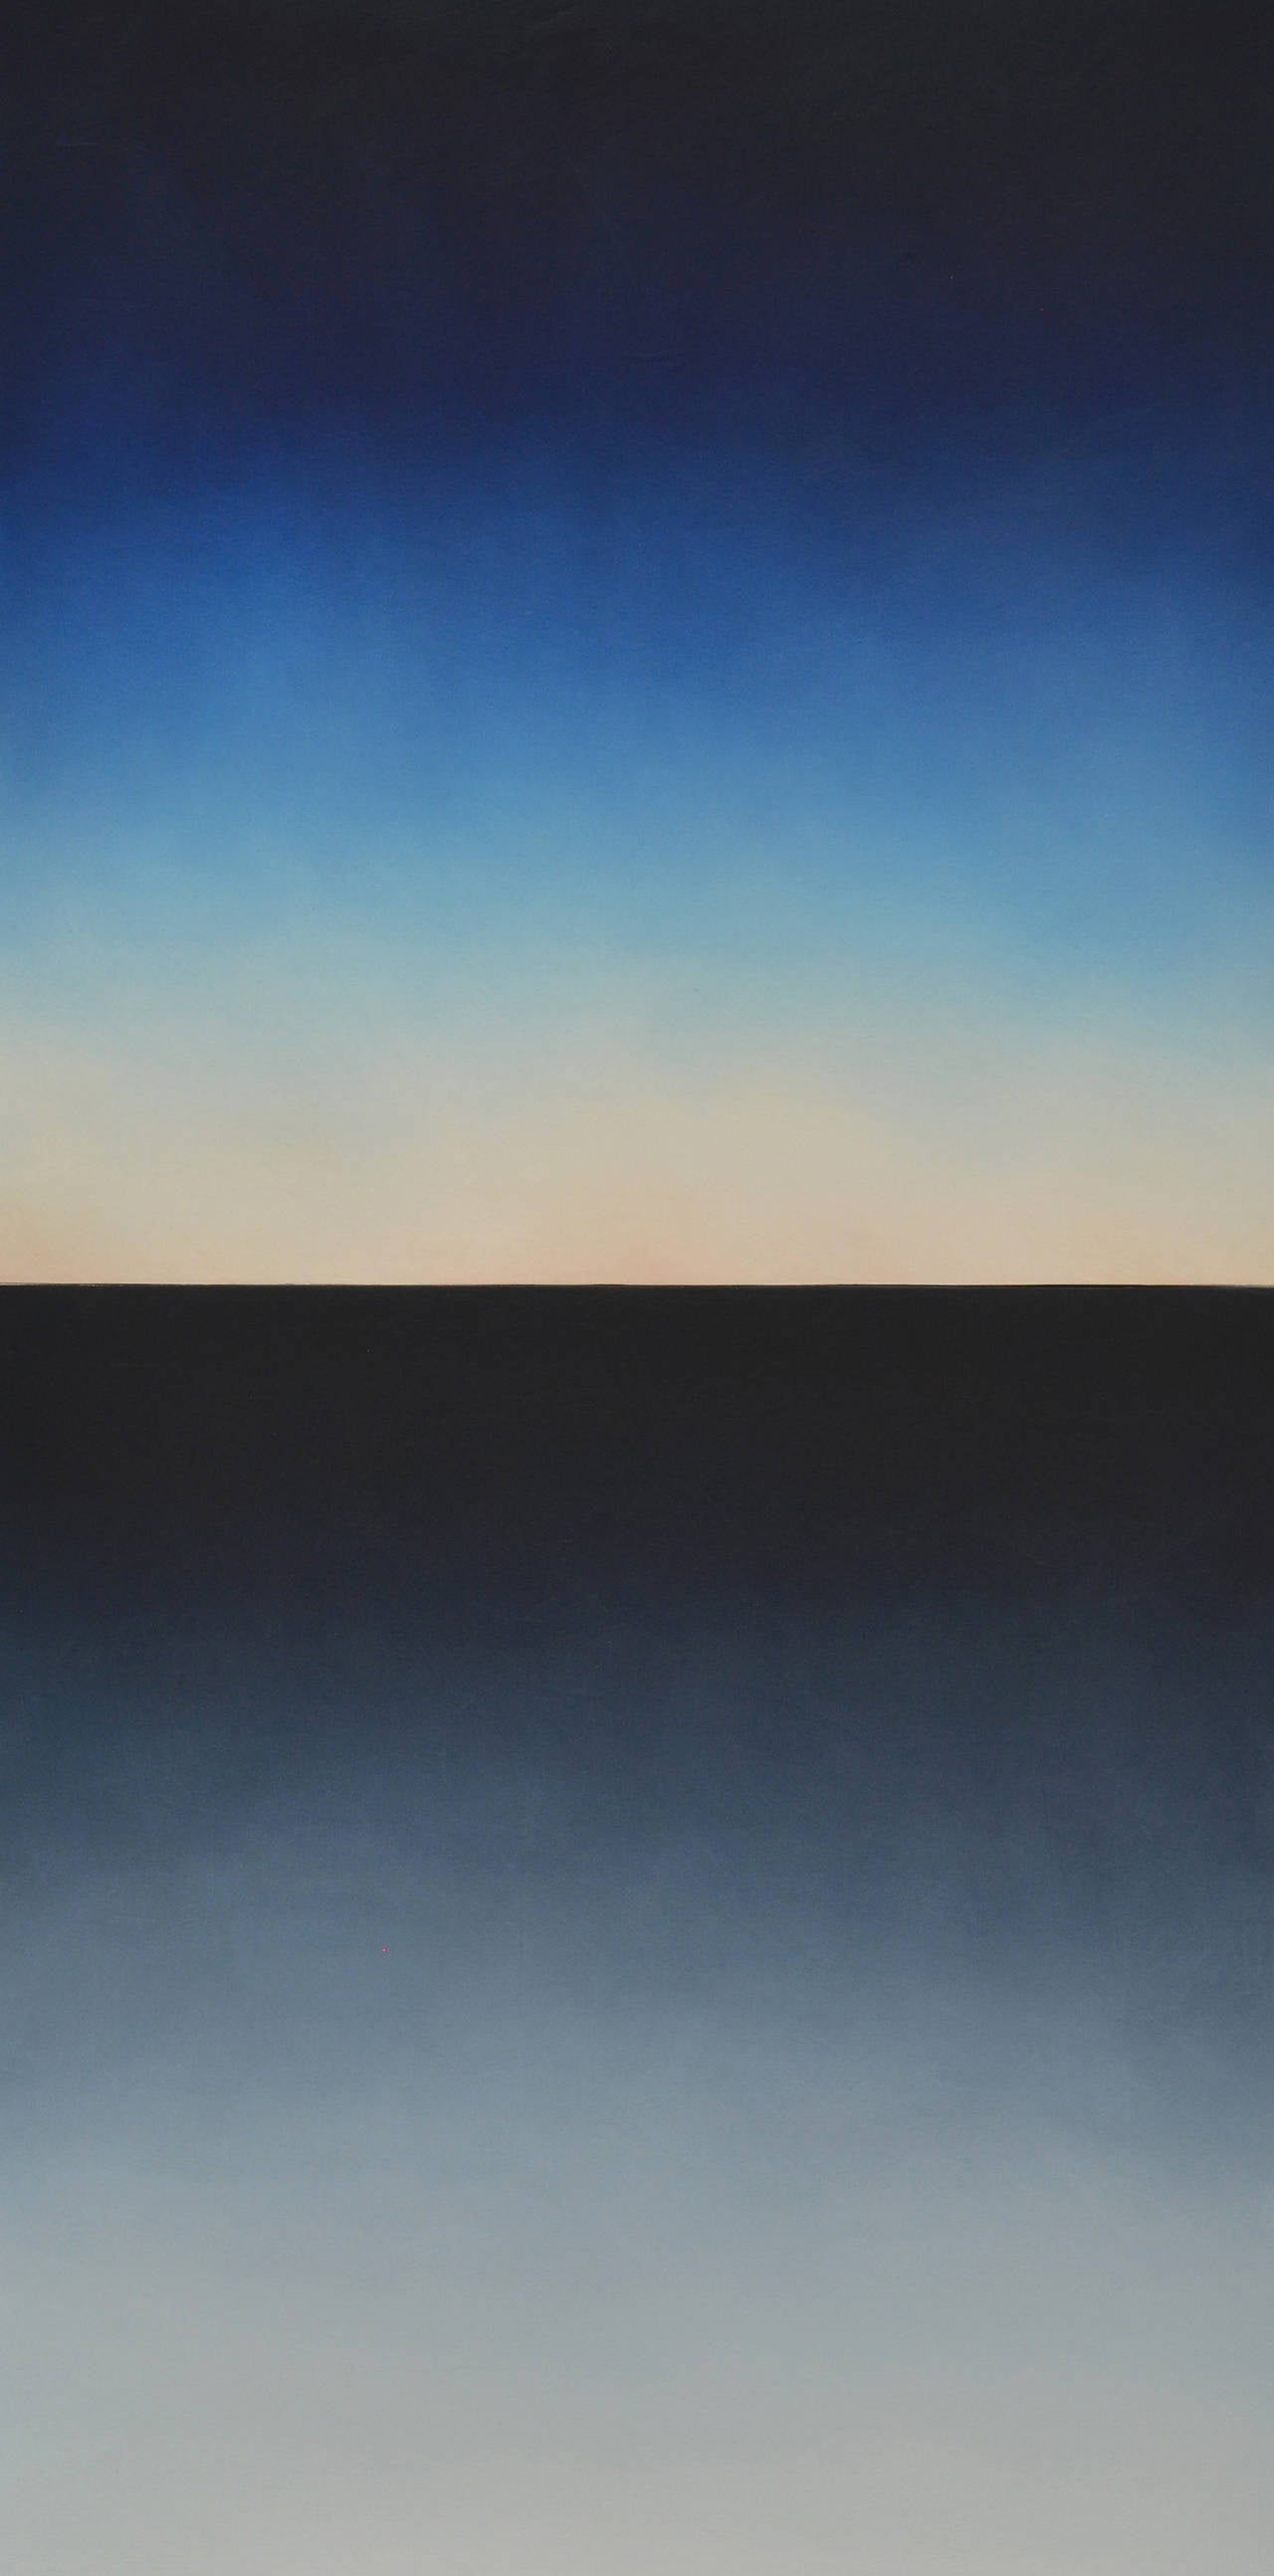 The View From Here, Westward Painting 3, 2015
Diptych; oil on panel
48 x 24 inches
WE141